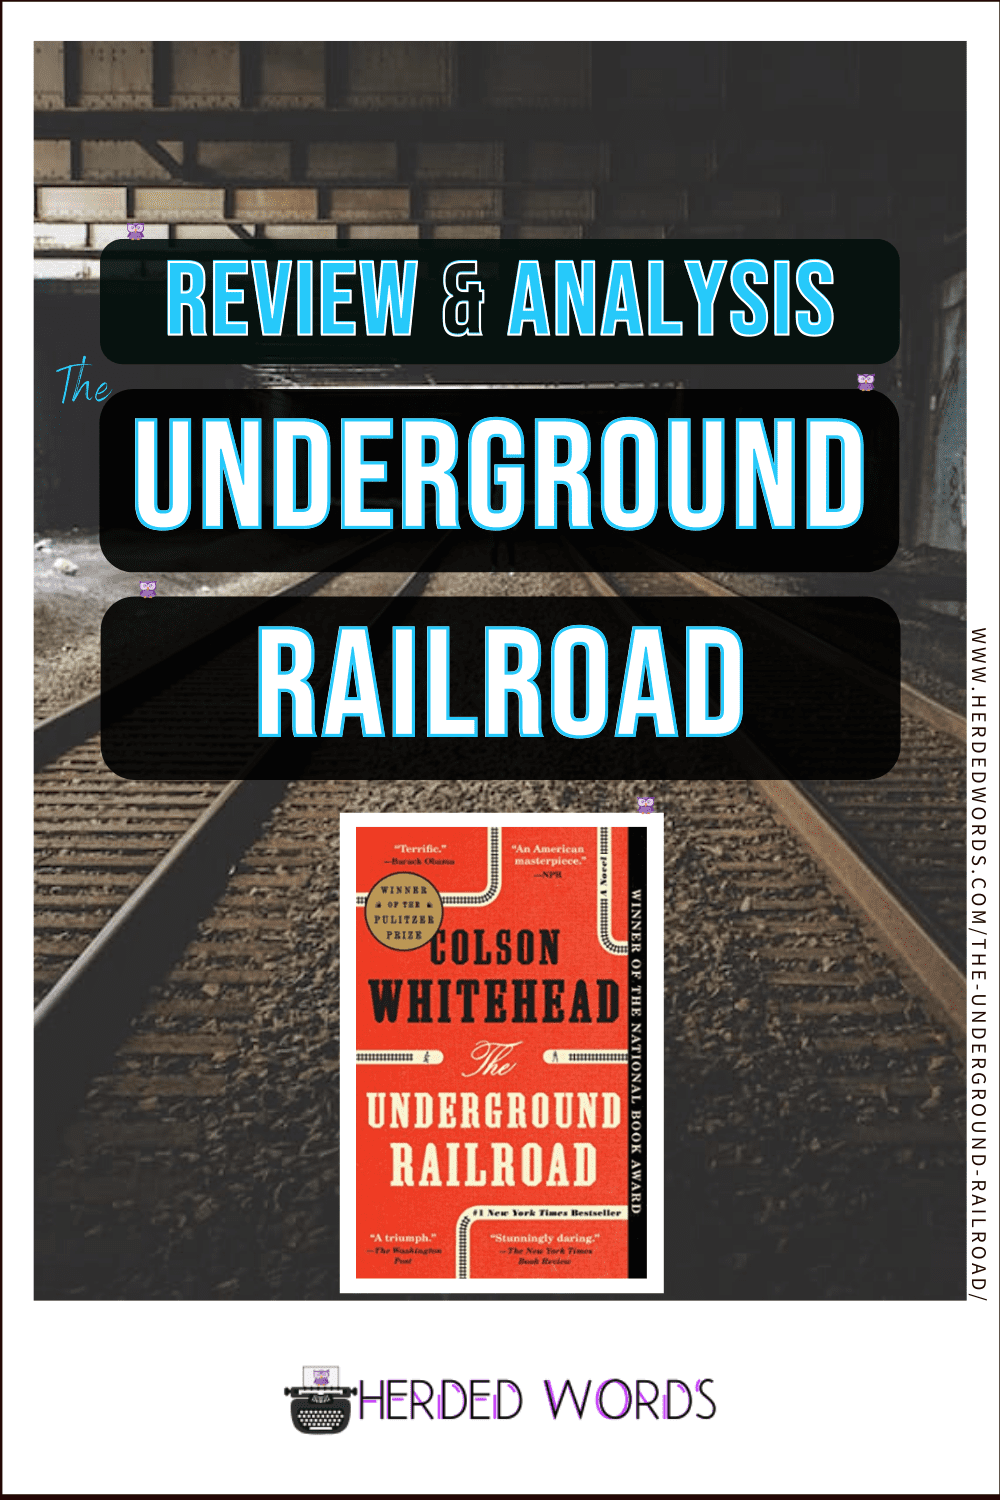 Image Link to The Underground Railroad Review & Analysis